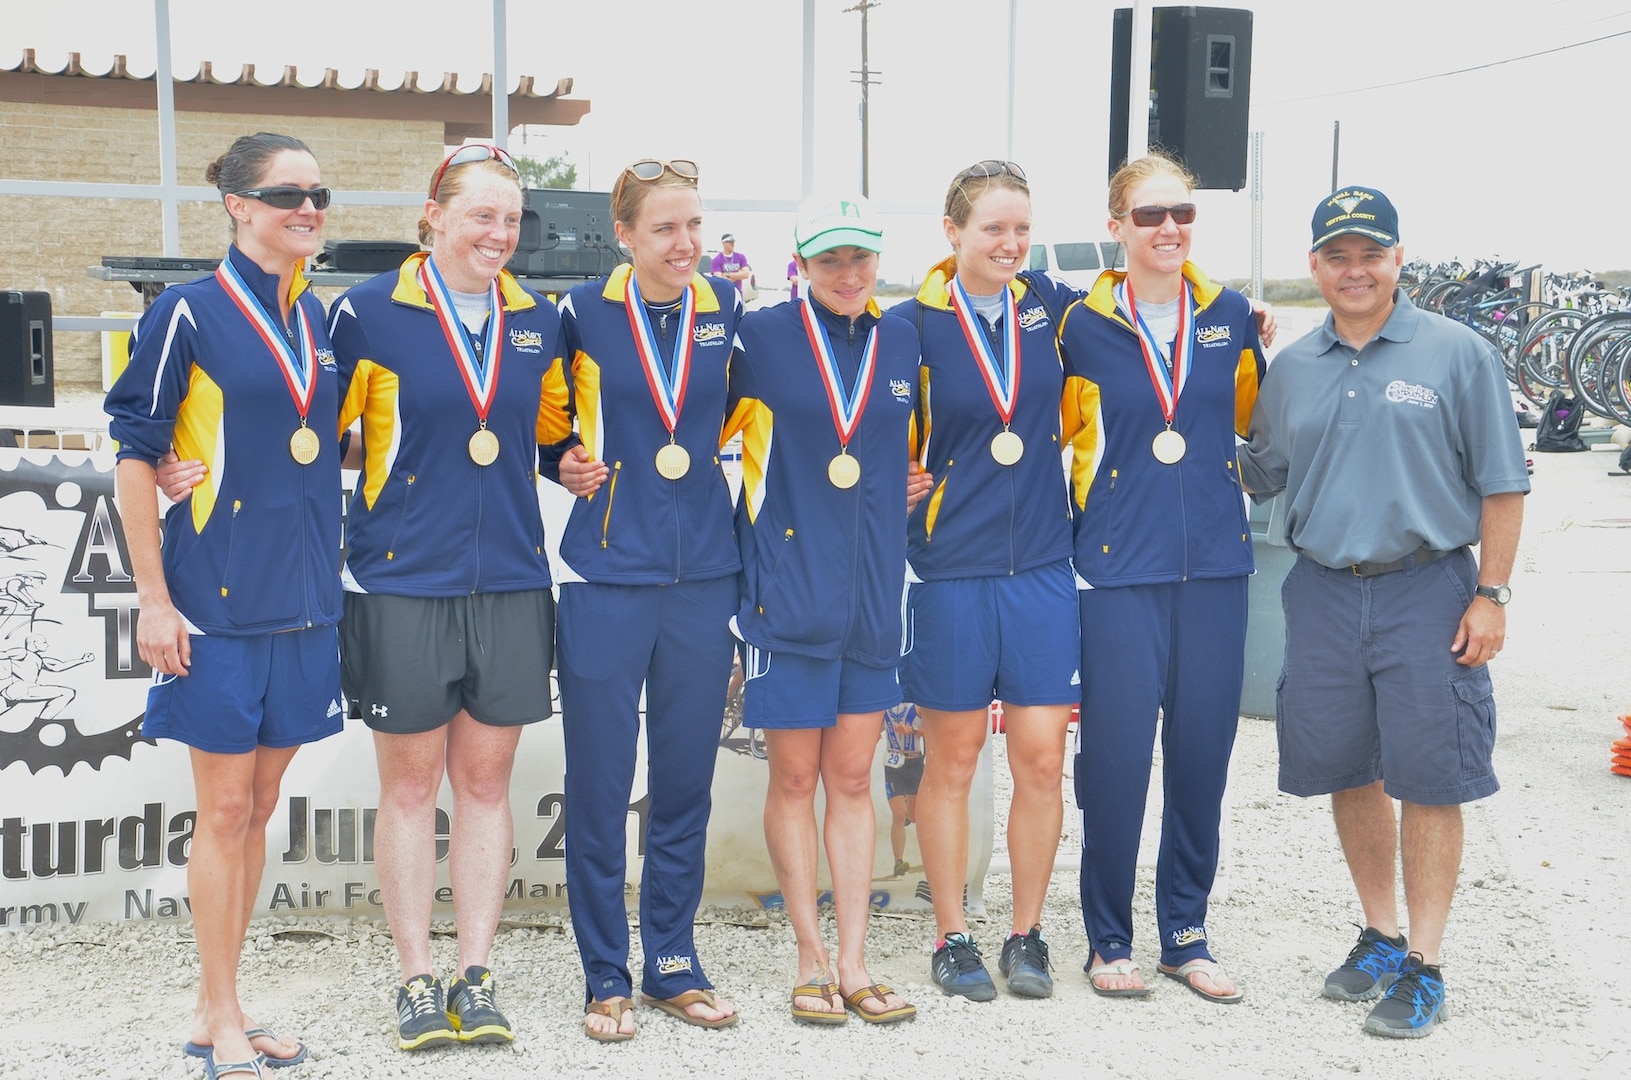 Winners of the 2013 Armed Forces Womens Triathlon Championship.  US Navy.